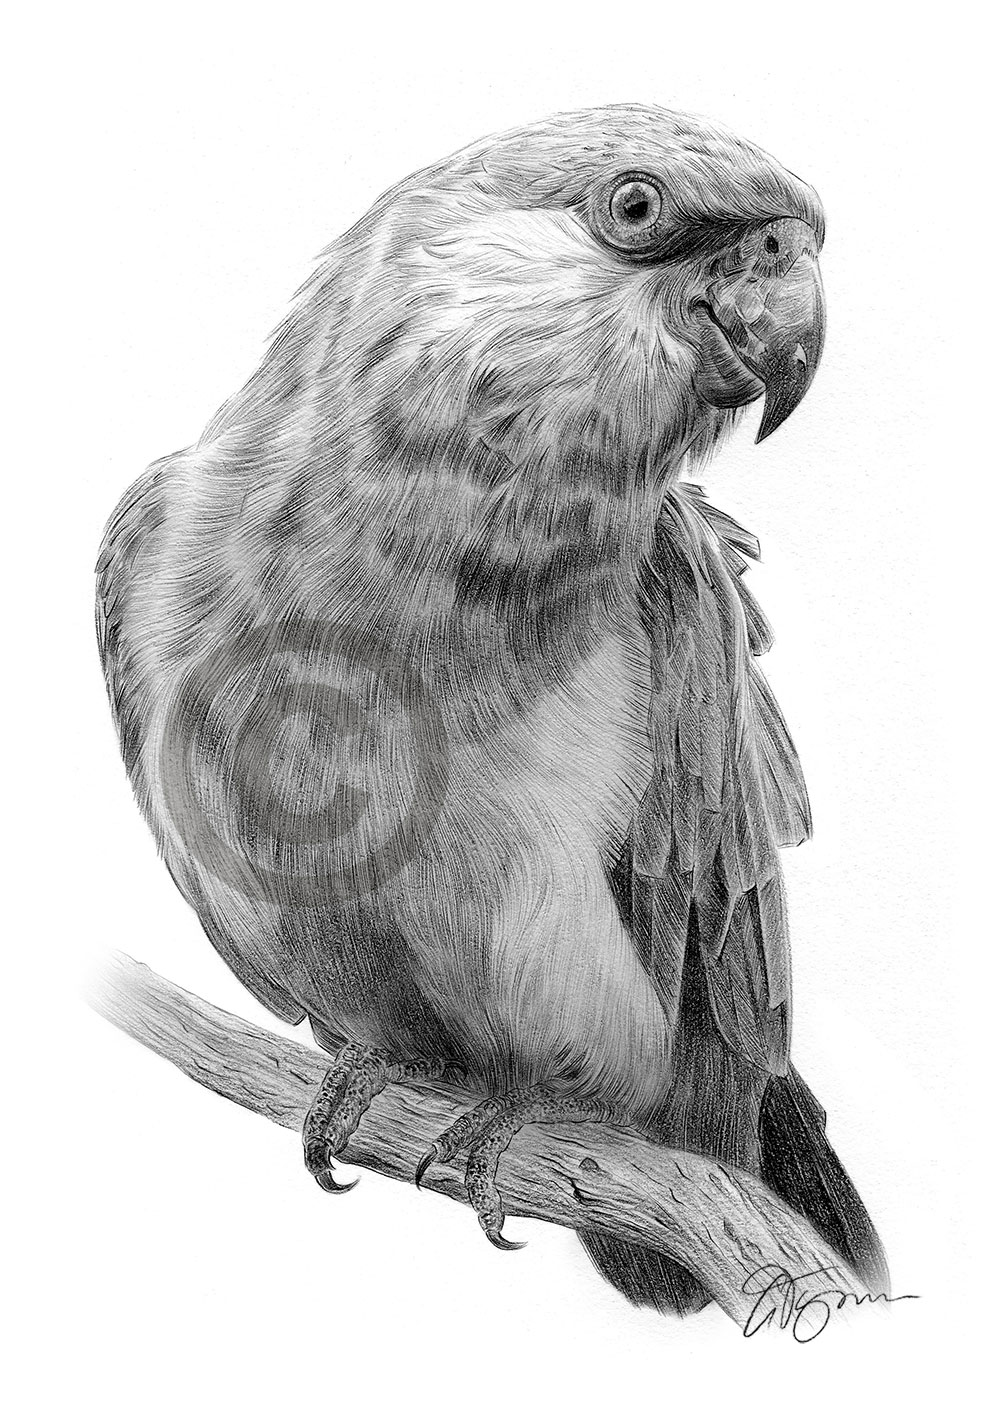 Pencil drawing of a parrot by artist Gary Tymon